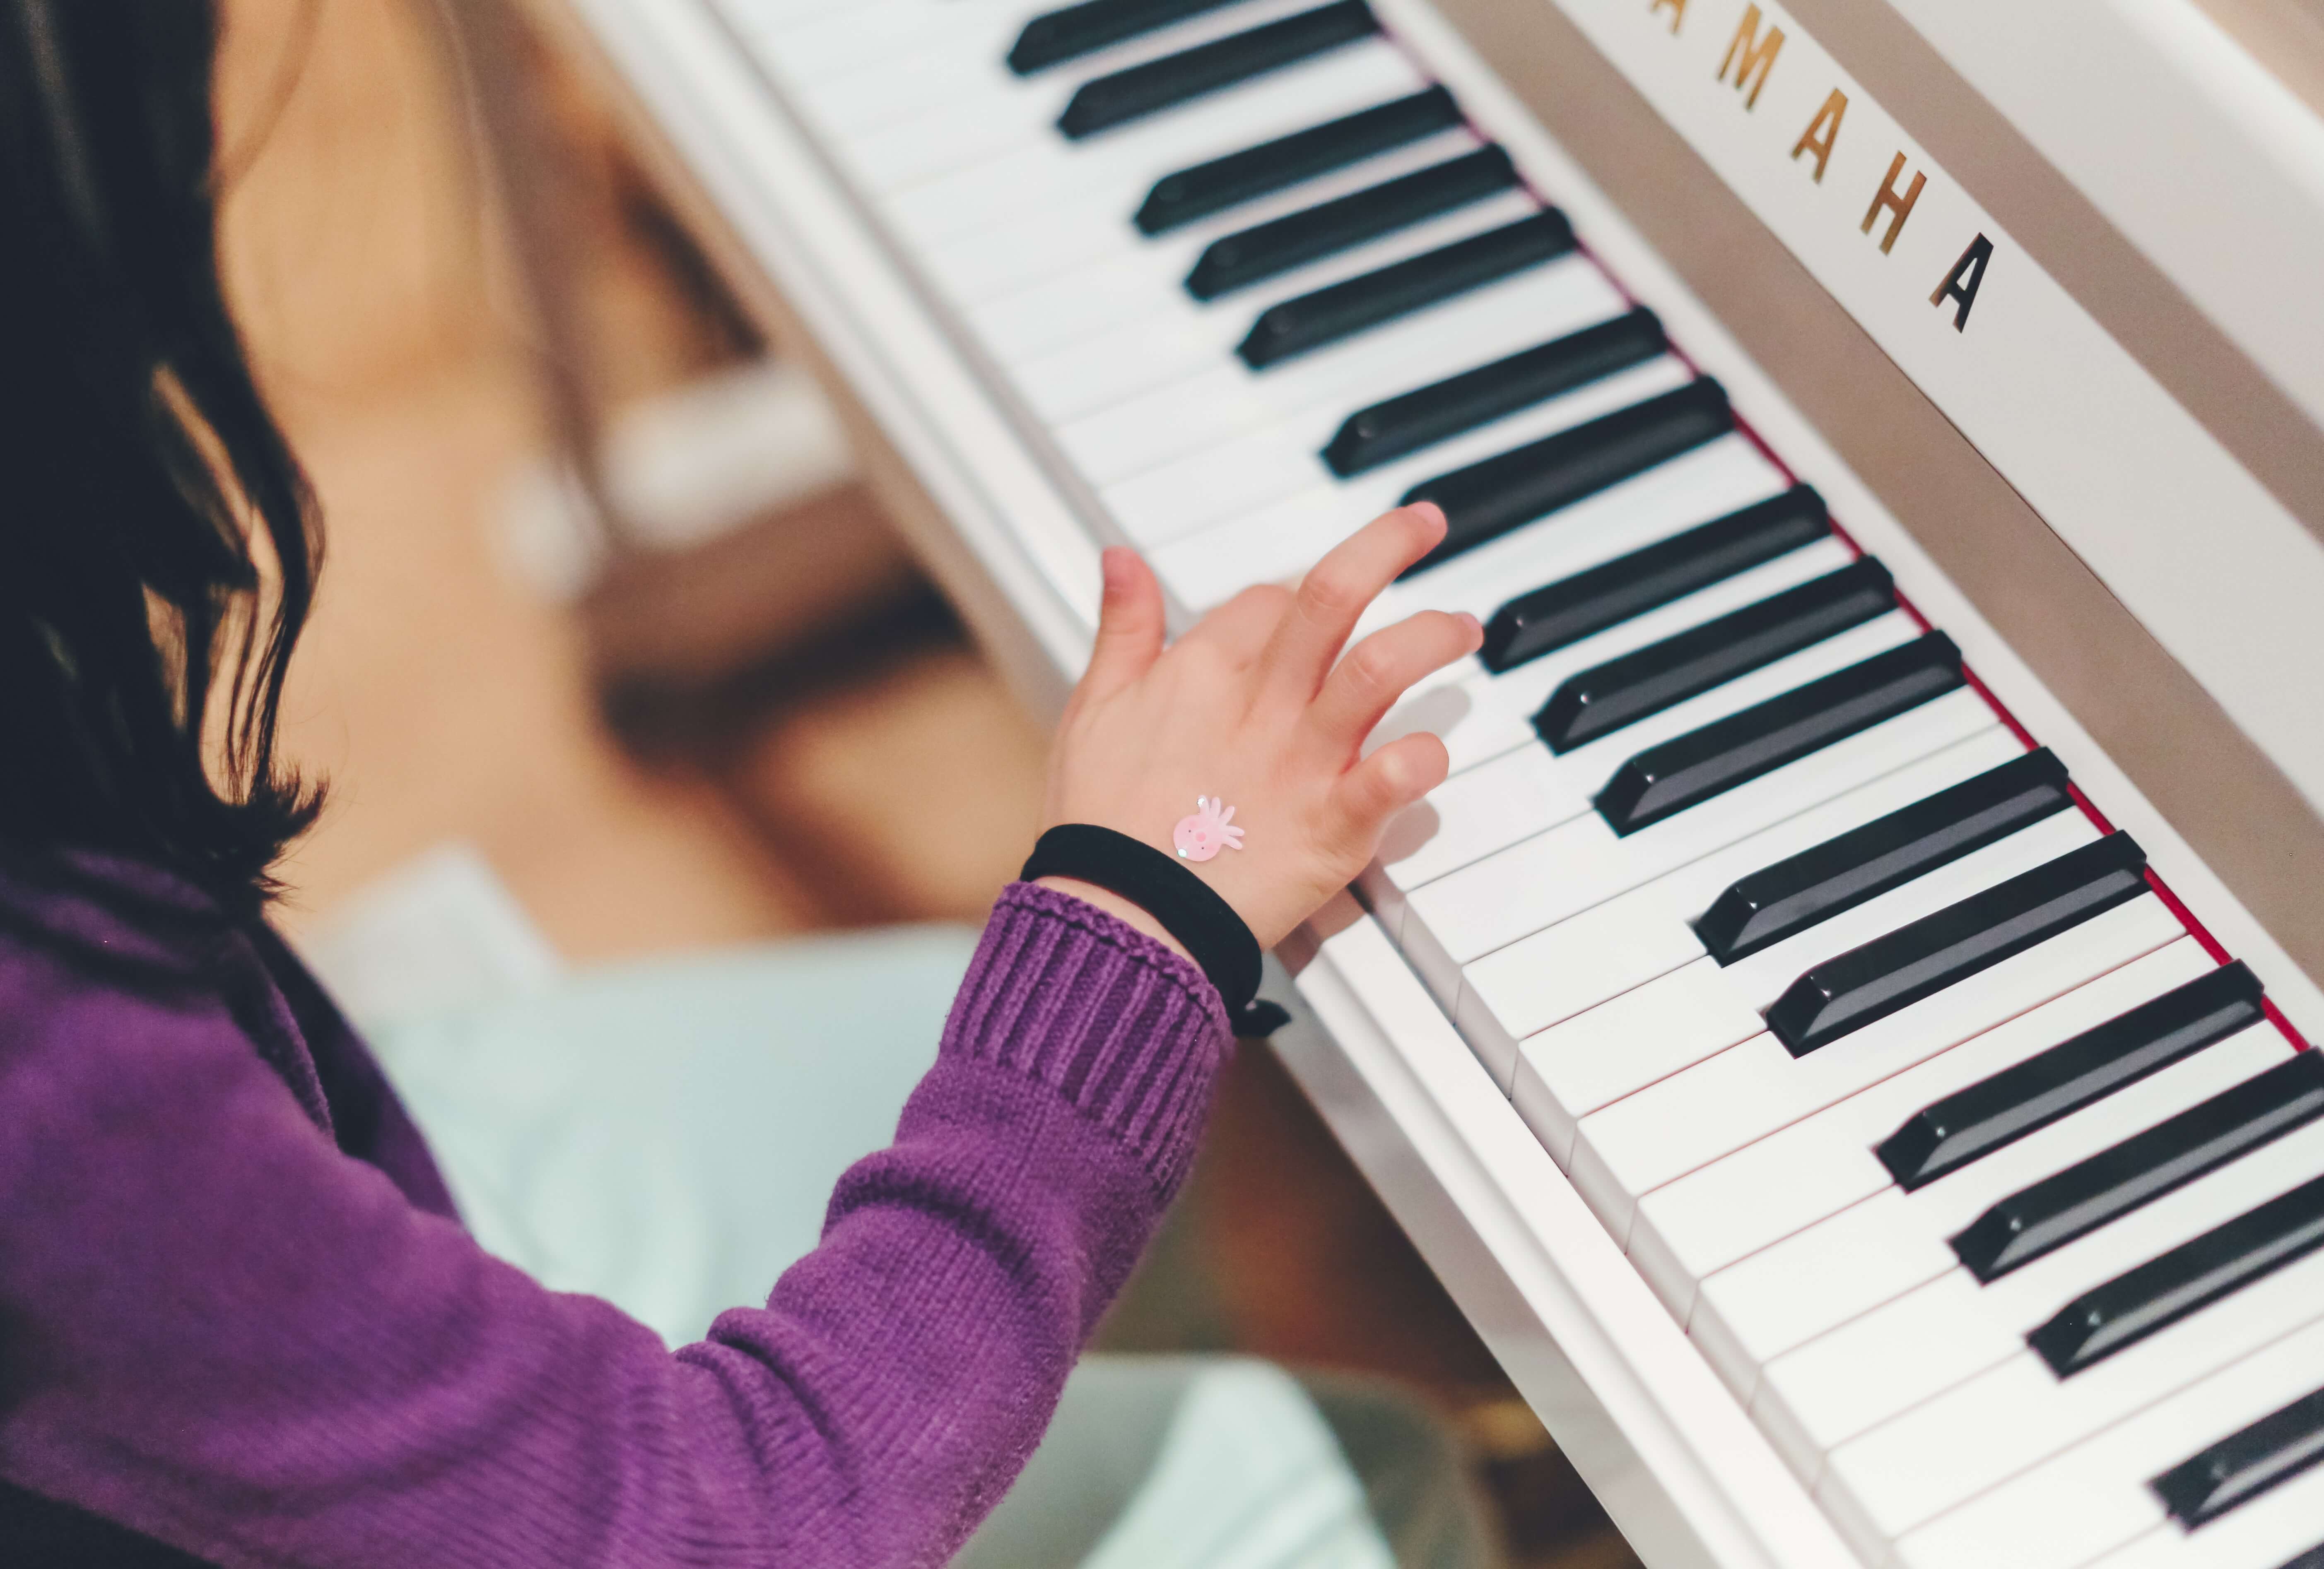 A little girl with dark hair plays an electric piano